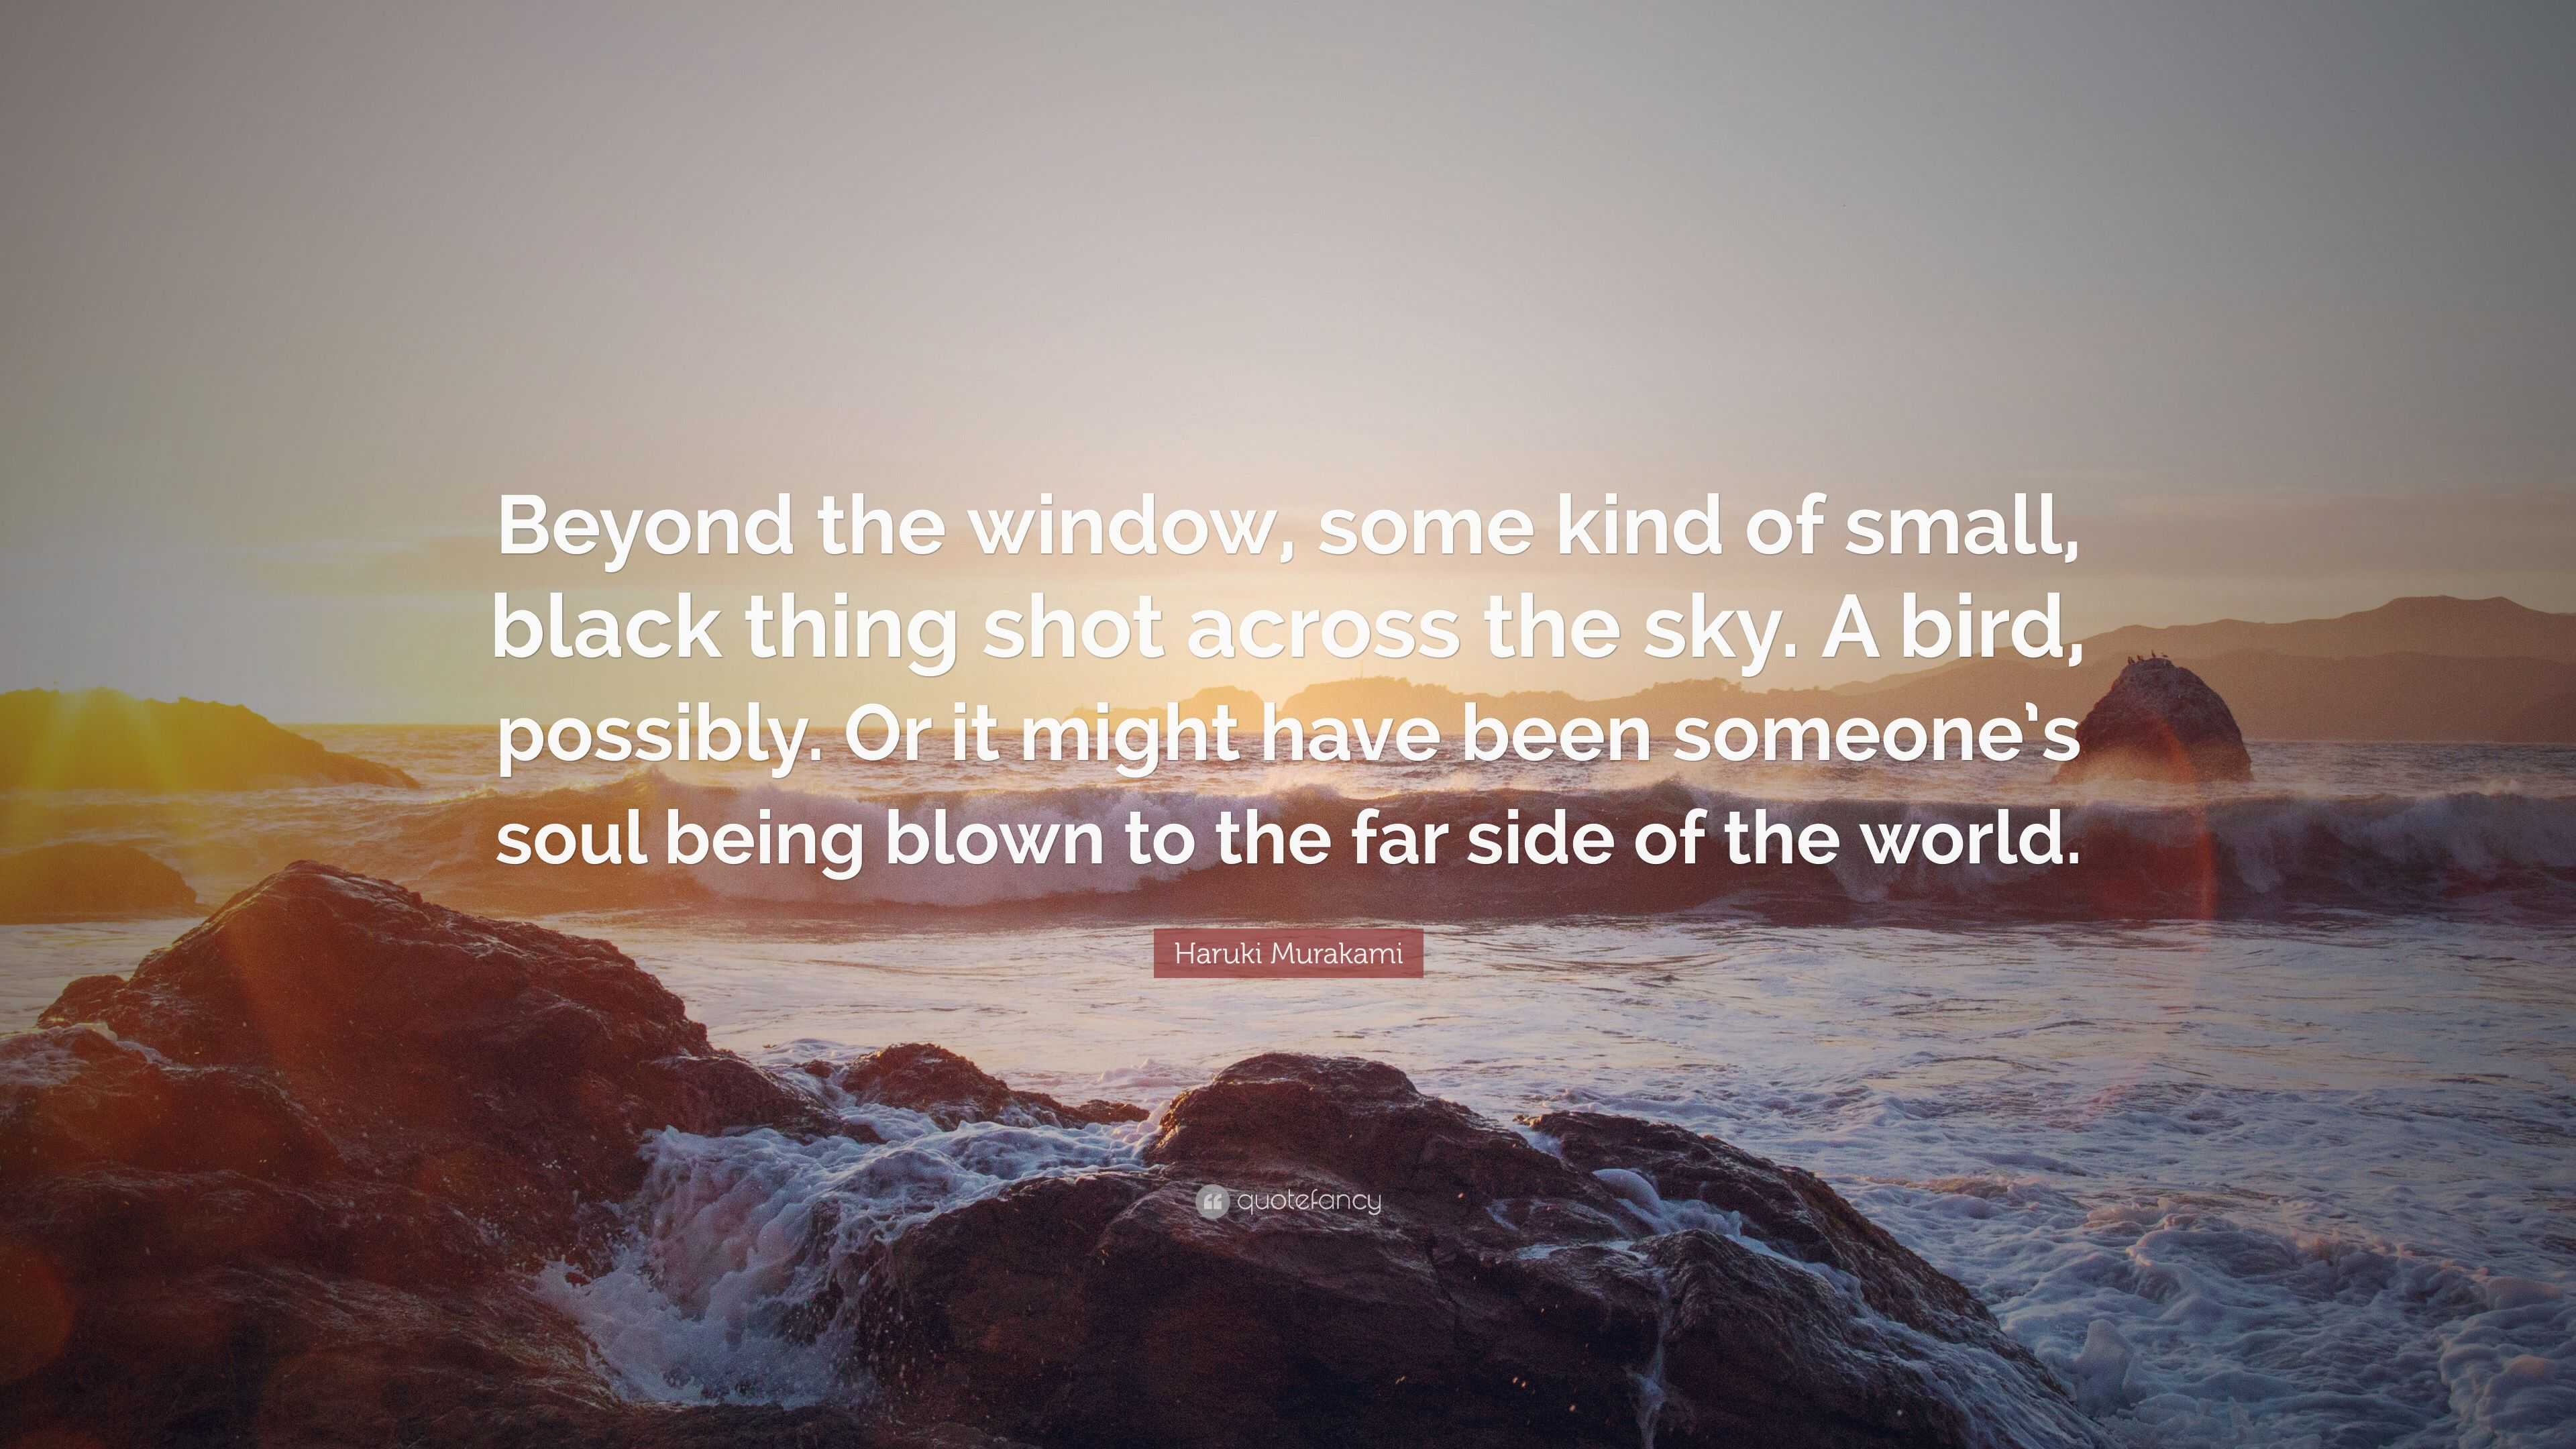 Haruki Murakami Quote: “Beyond the window, some kind of small, black thing  shot across the sky. A bird, possibly. Or it might have been someone'”